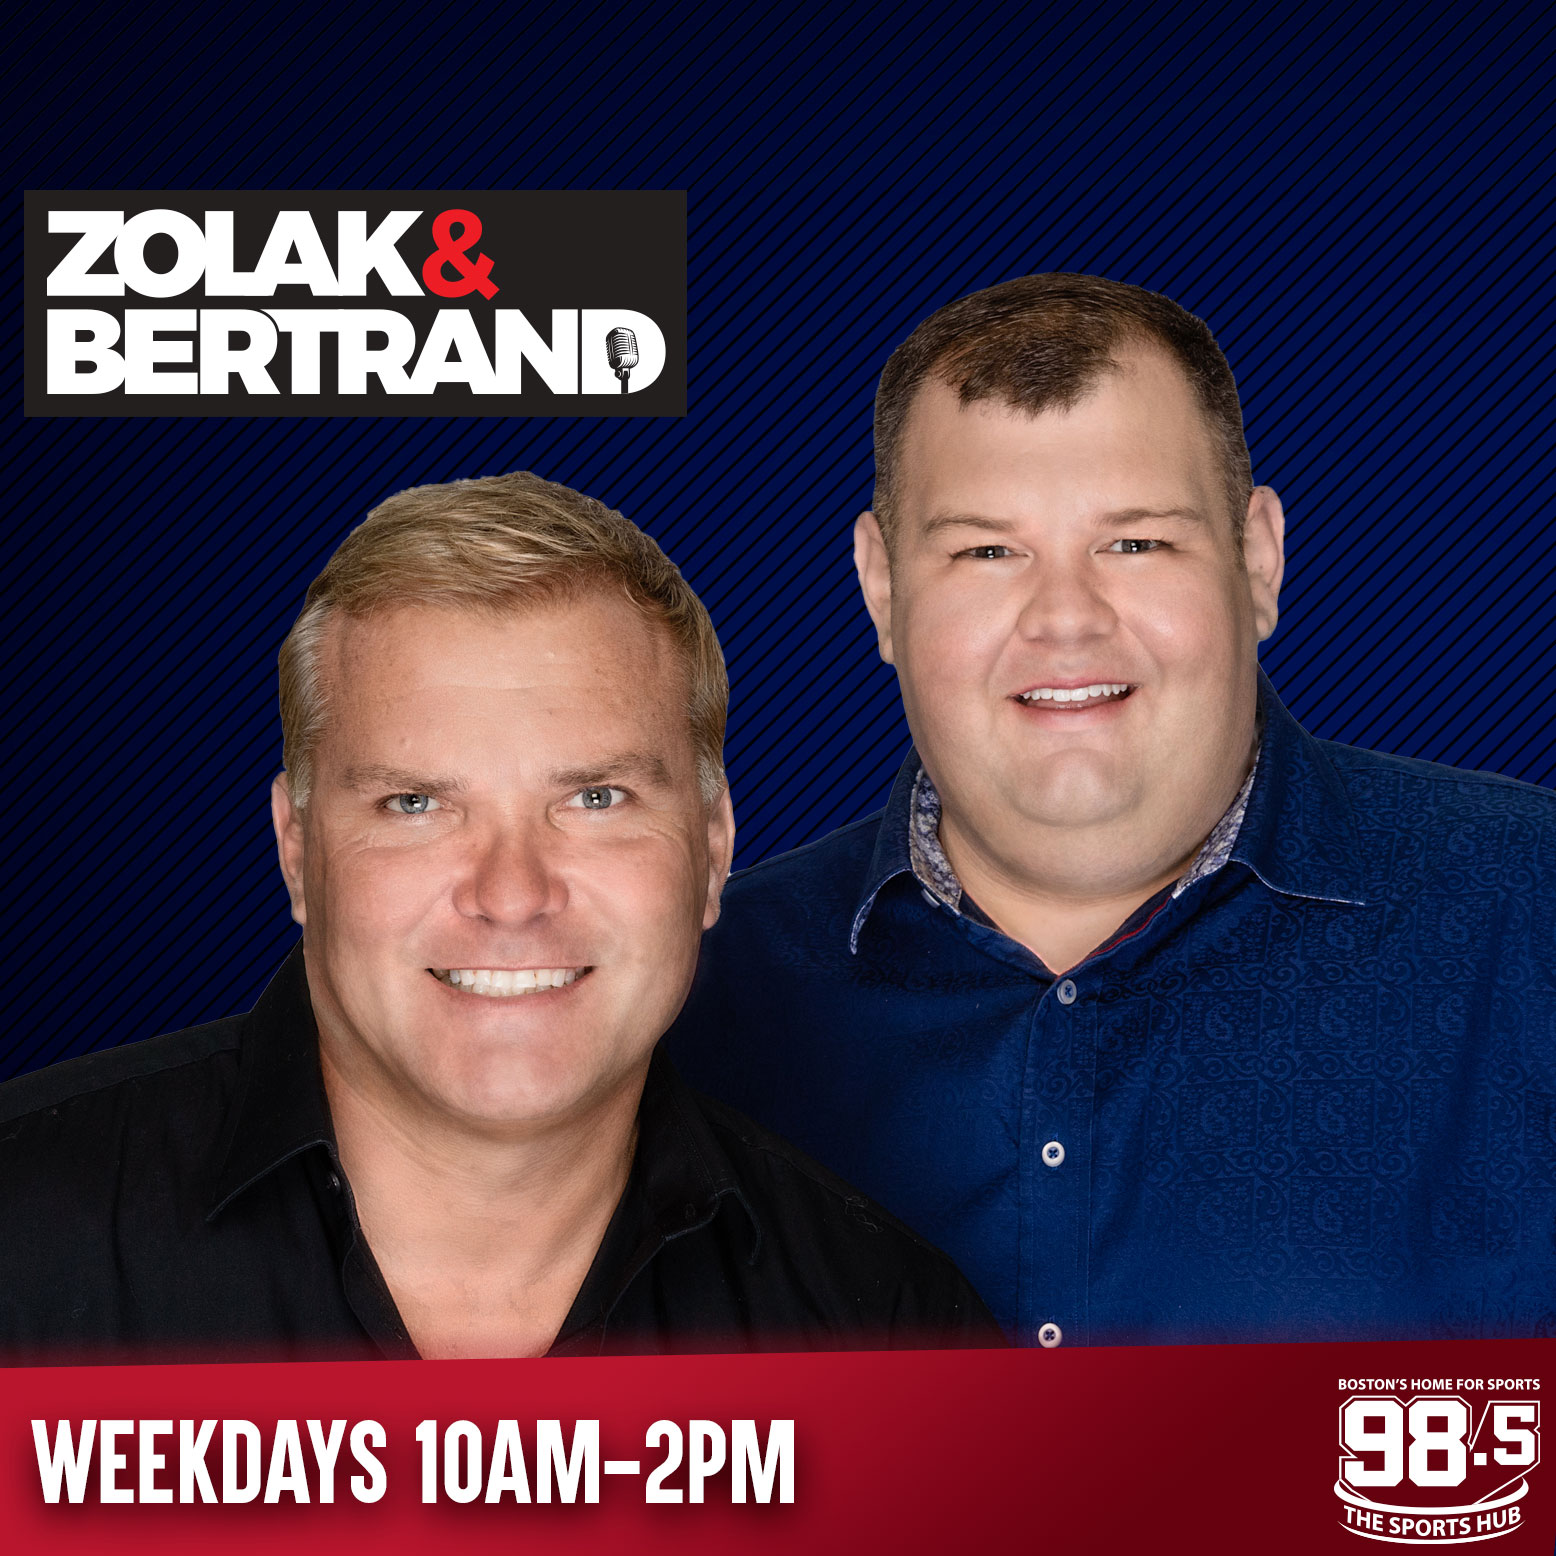 David Ortiz, First-Ballot HOFer? // Red Sox Not Spending Yet // Patriots Getting Too Confident? - 11/23 (Hour 2)